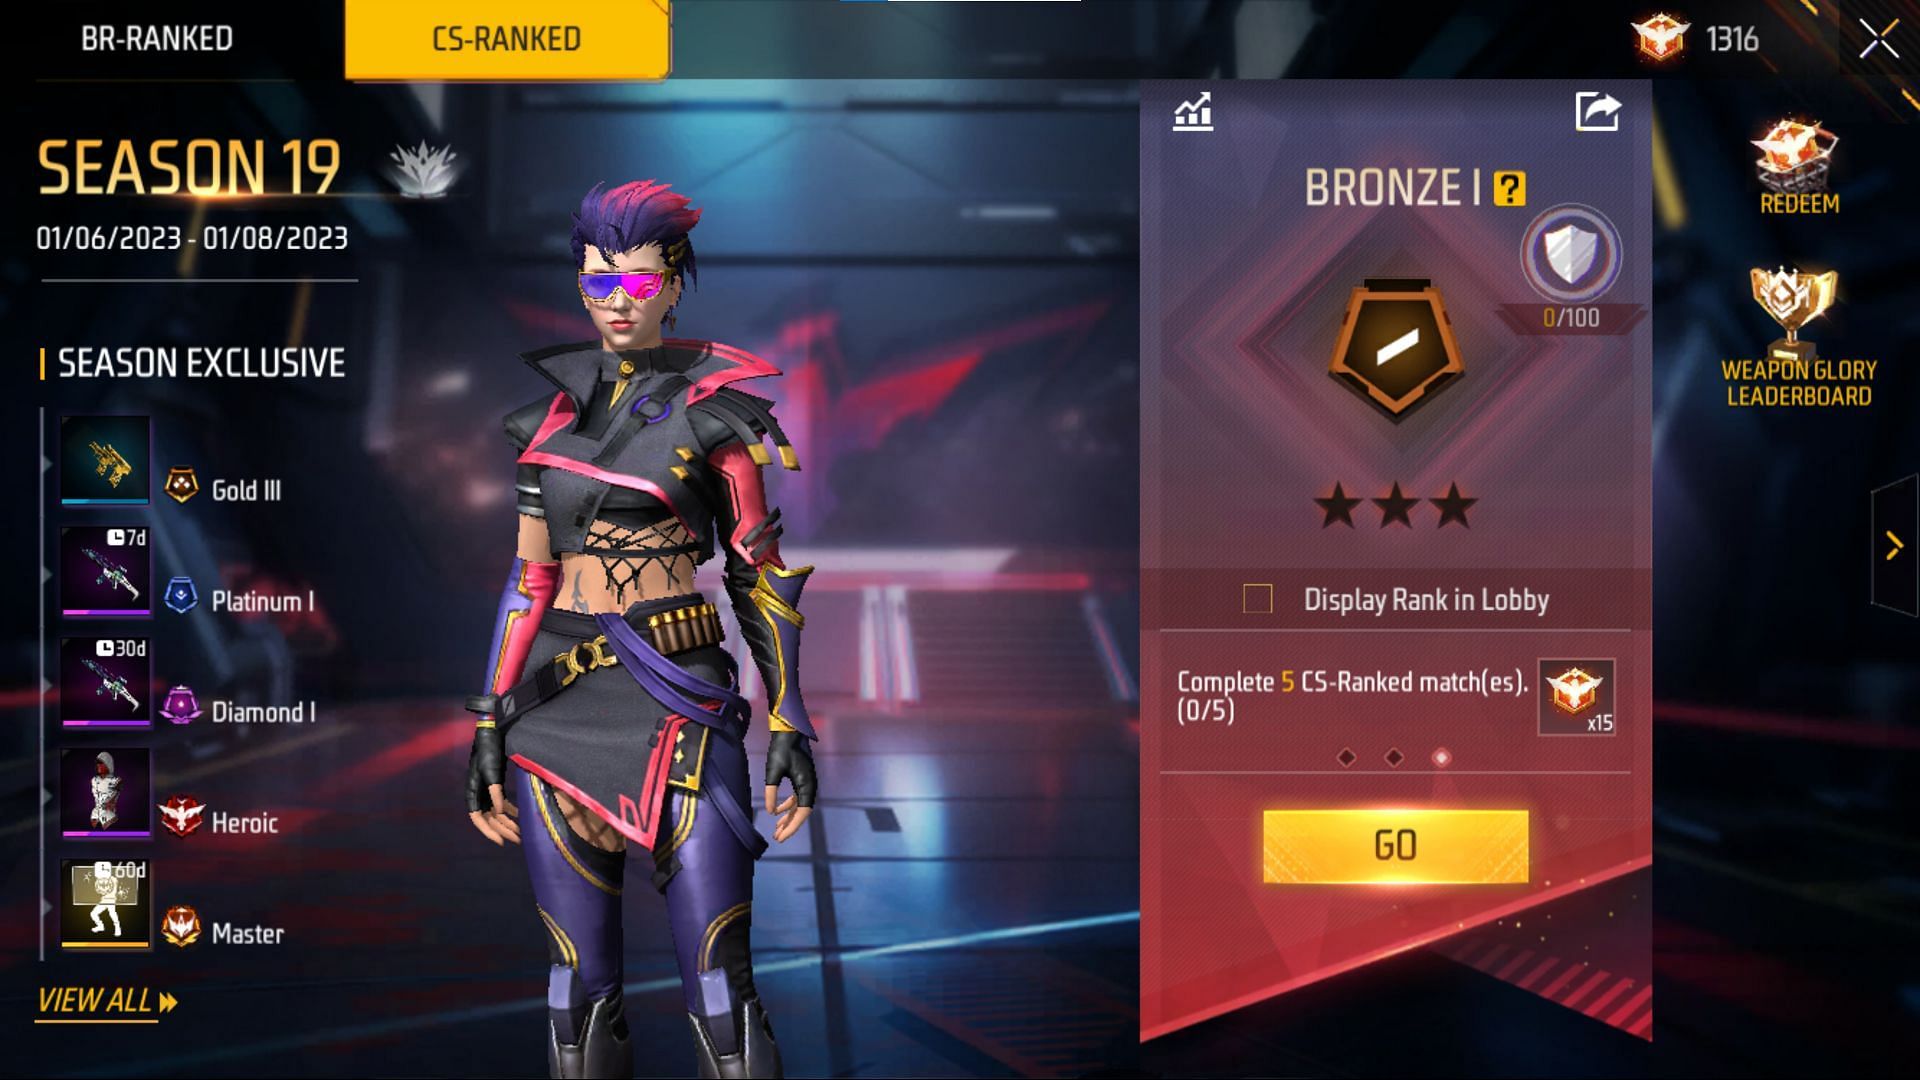 Free Fire Advanced Server: Expected release date for OB41 APK